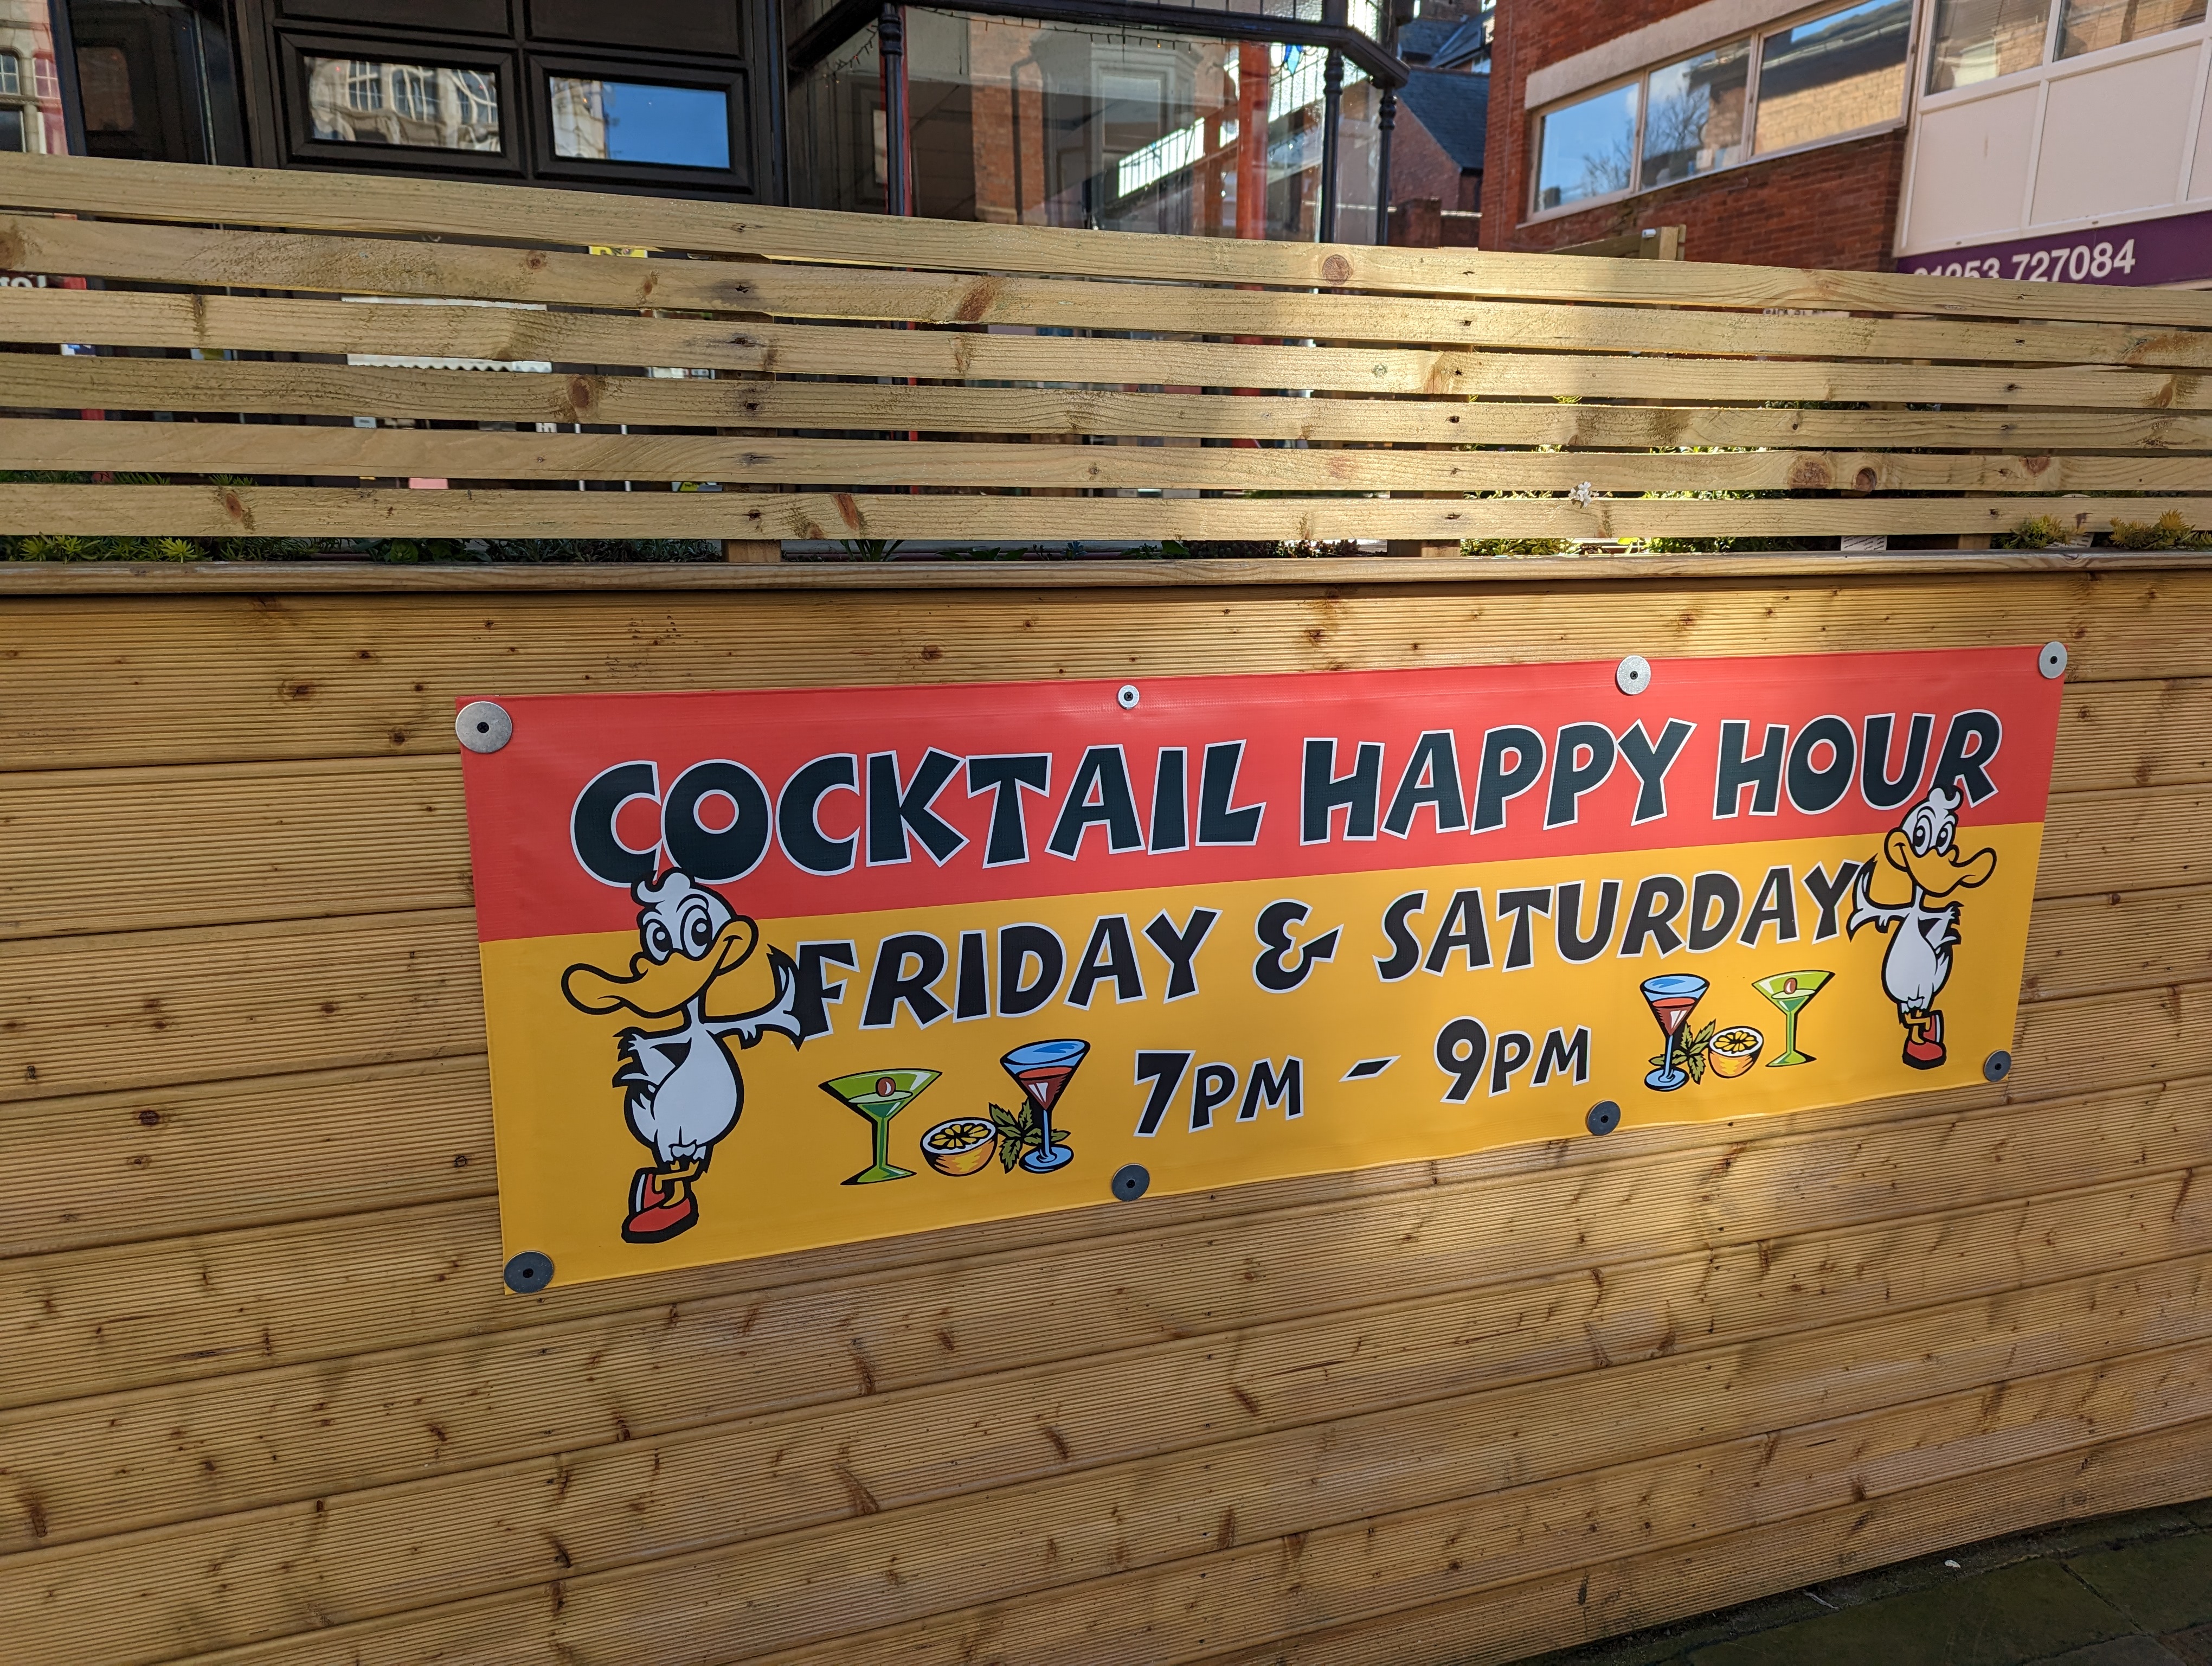 Coctail happy hours Friday and Saturday from 7pm-9pm